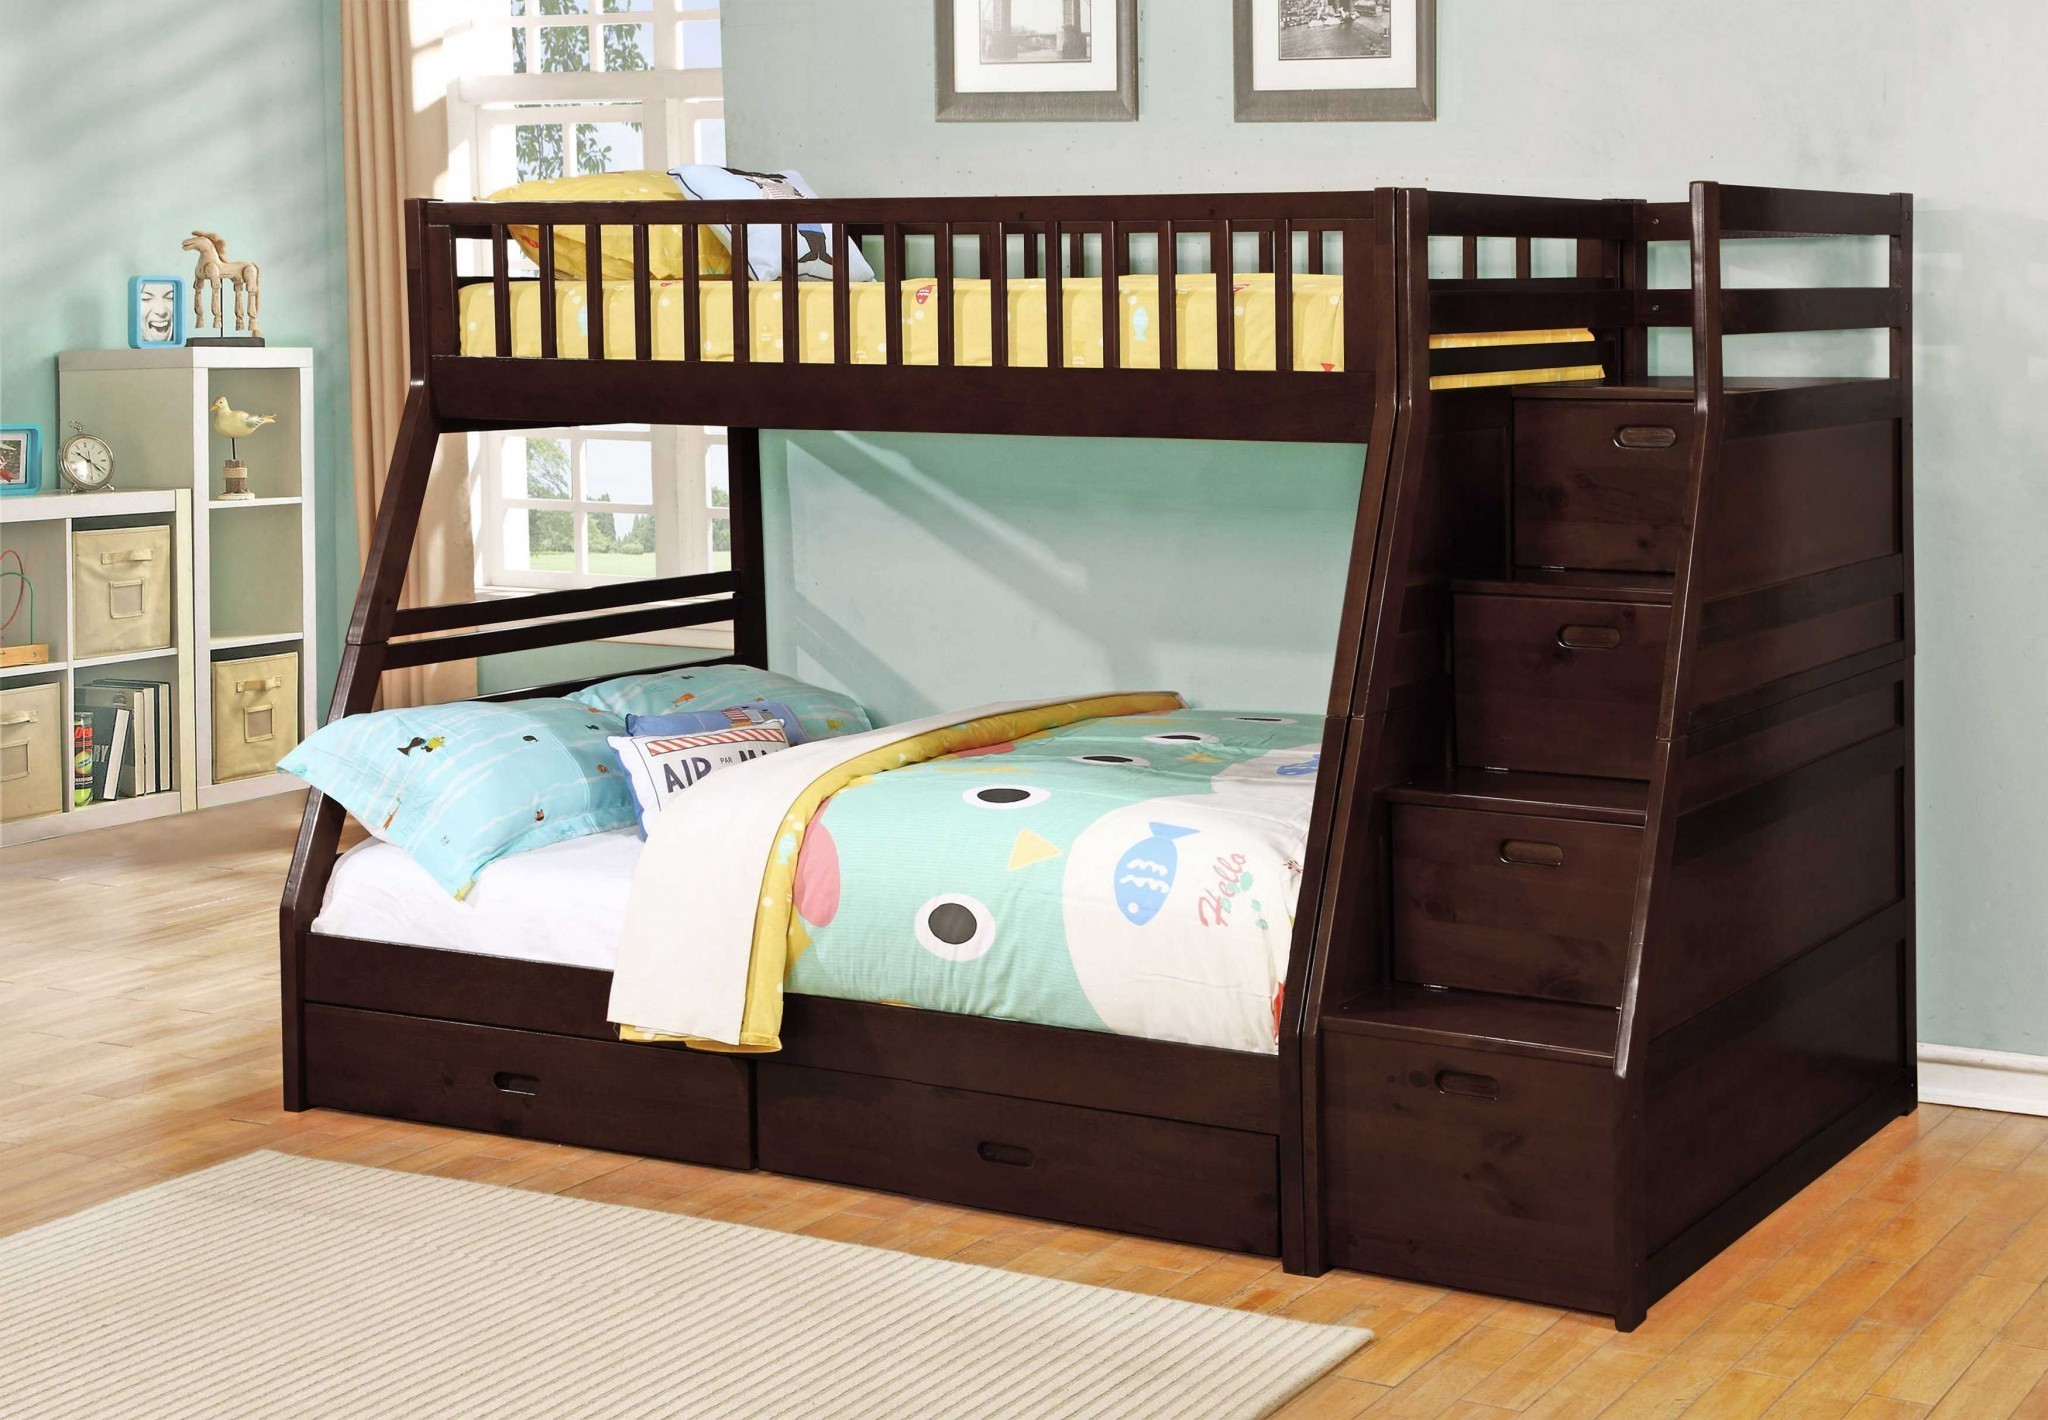 81" X 59" X 65" Brown Manufactured Wood and Solid Wood Twin or Full Staircase Bunk Bed with Storage